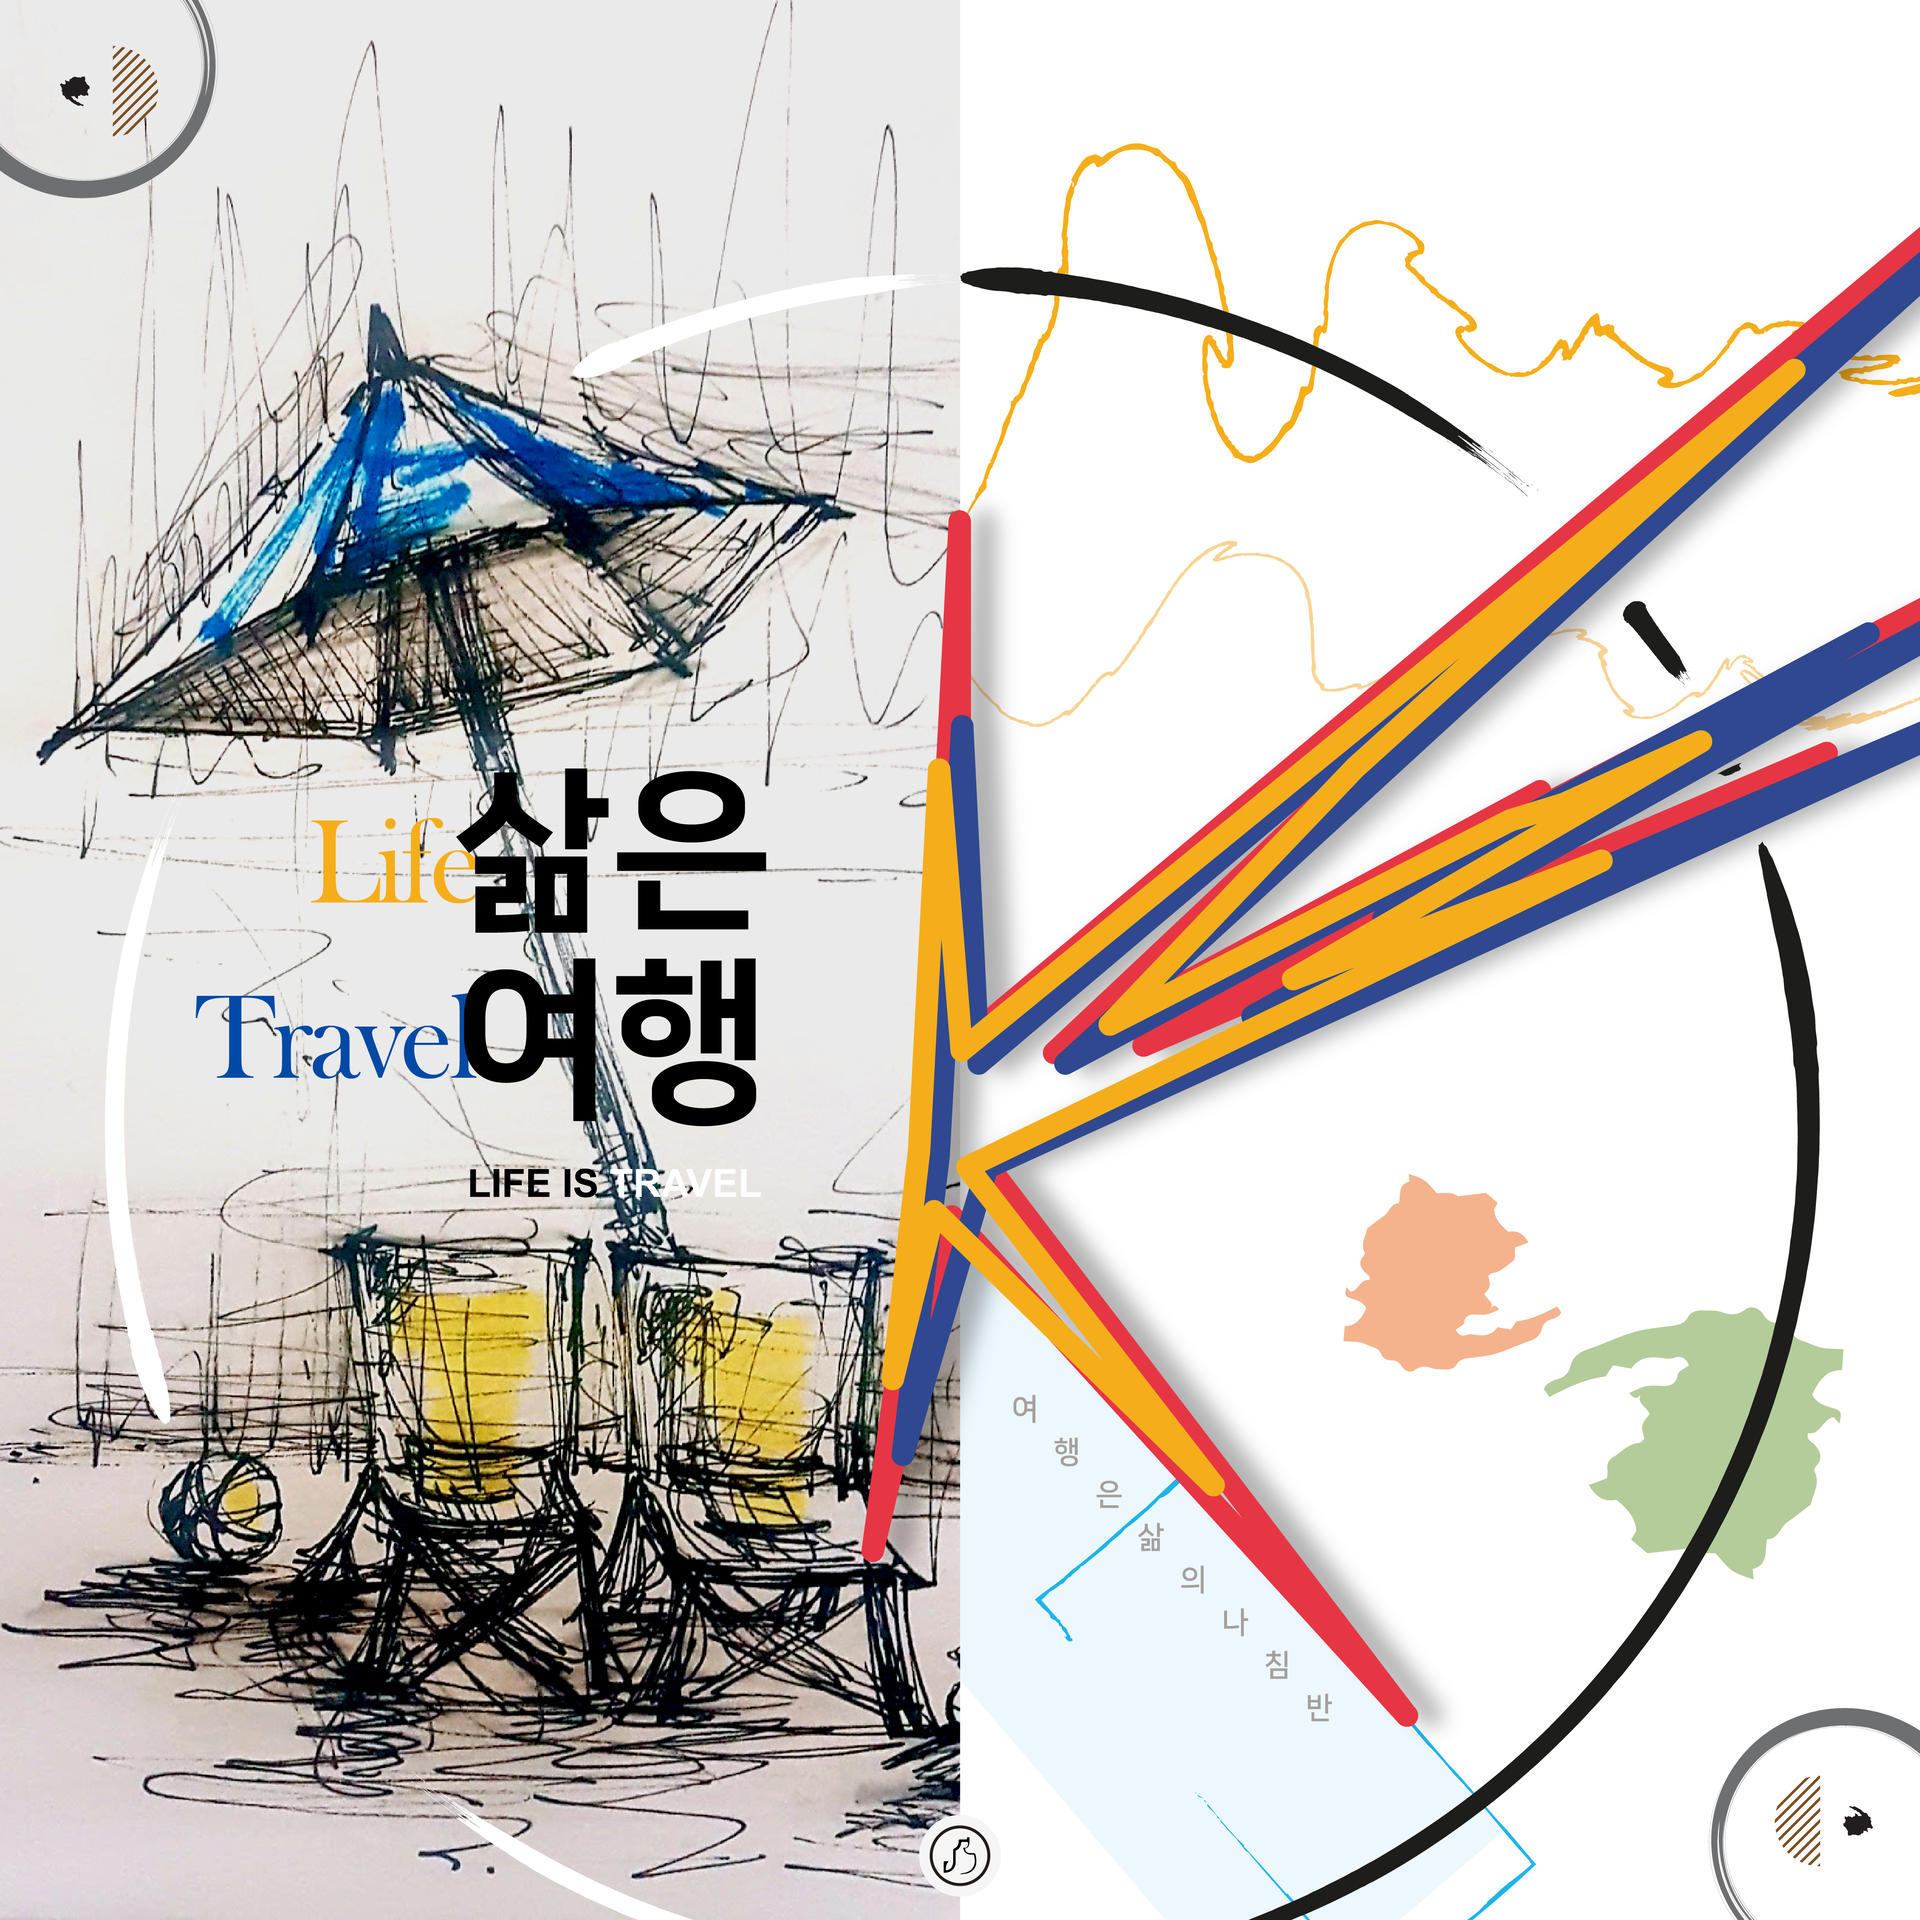 <span style="font-size: 14px; font-family: 'Gilroy' !important;">삽이-정진섭, 삶은 여행 Life is ravel, 2020, Mixed media, 1080×1080px</span>